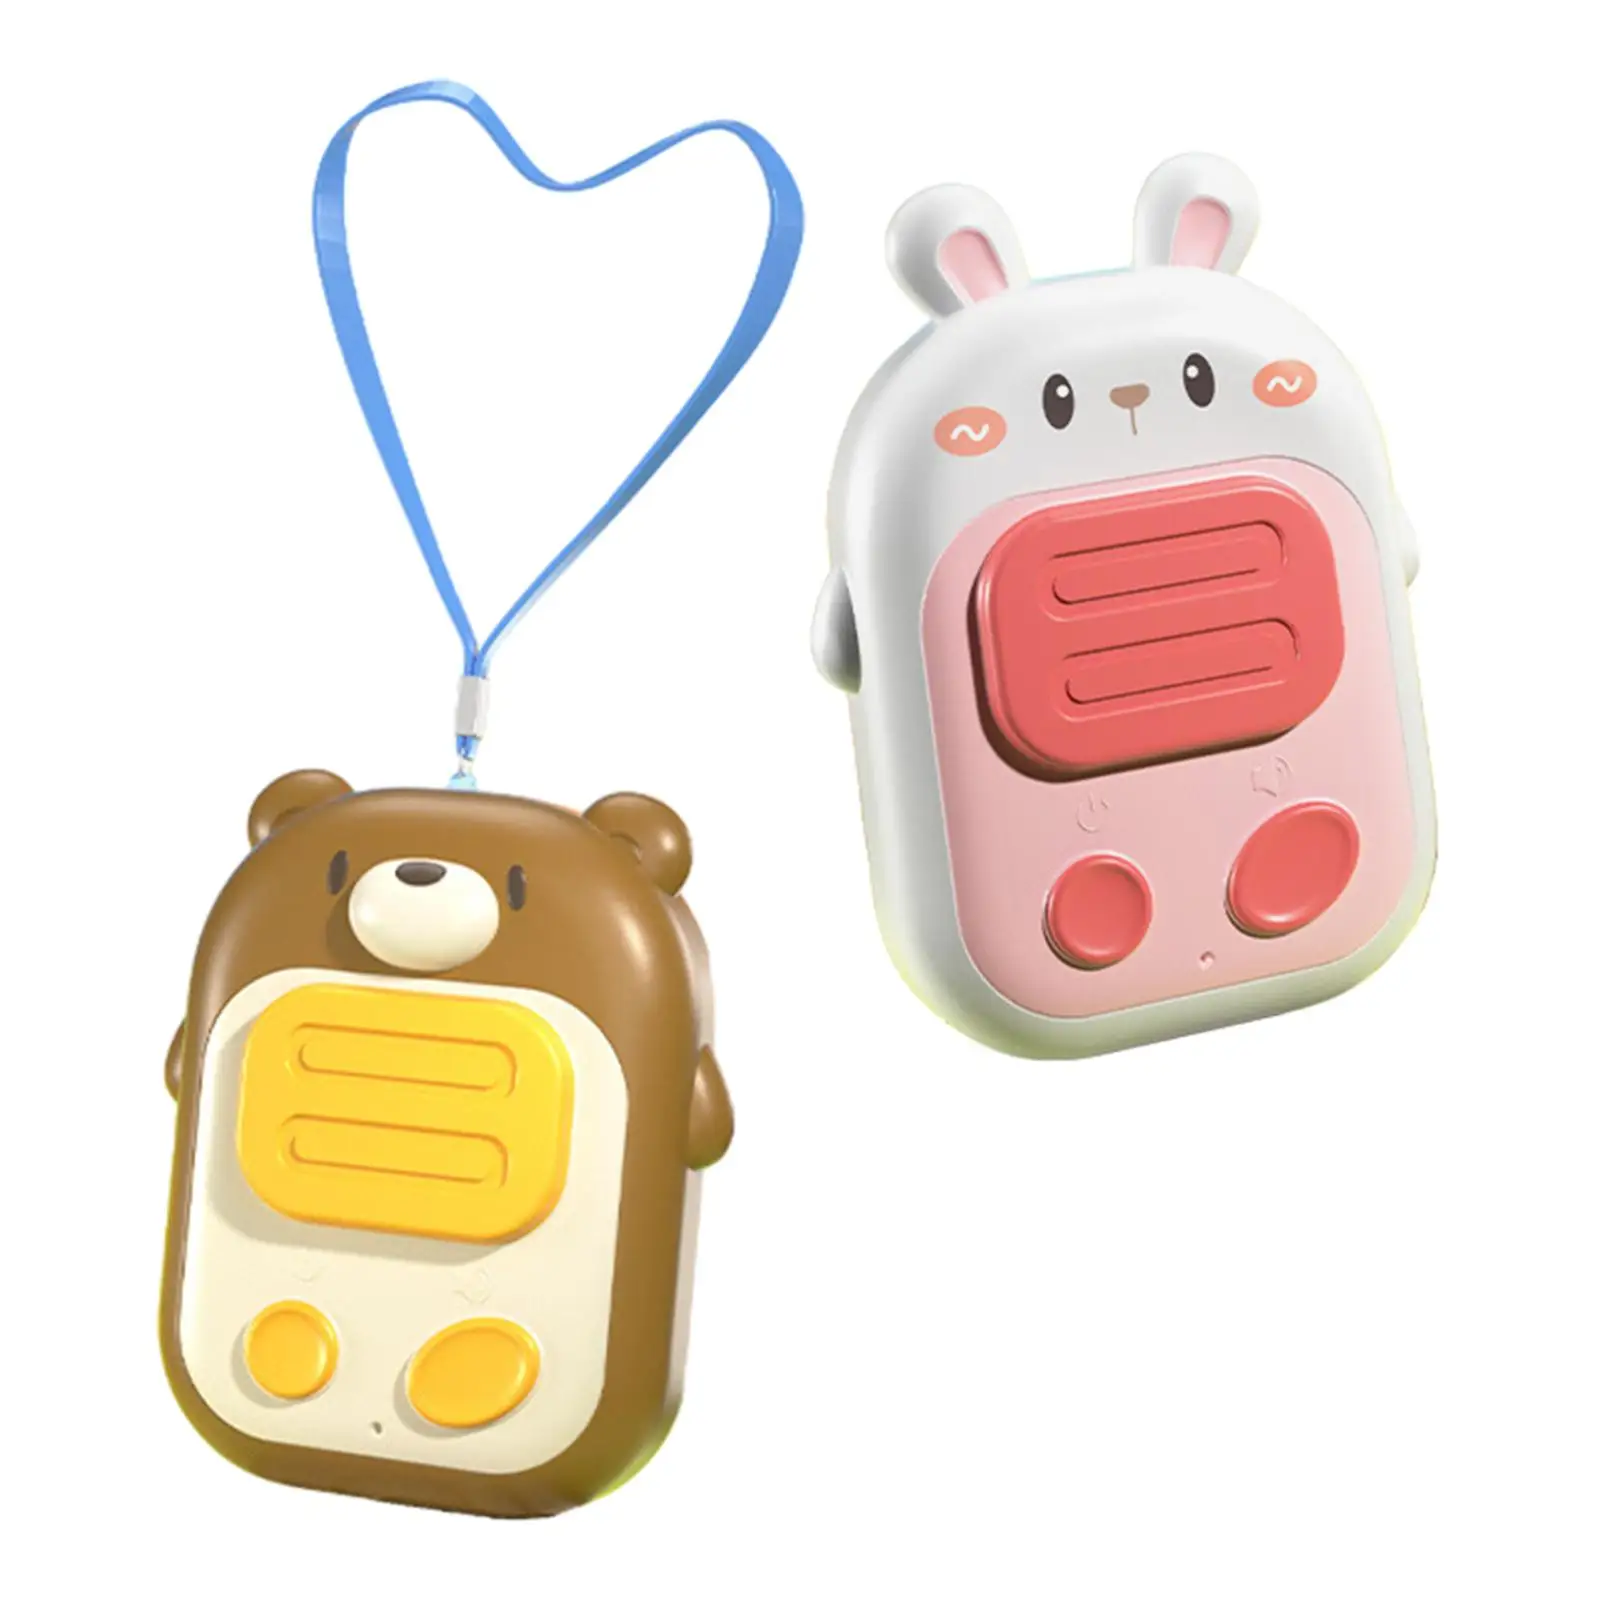 2 Pieces Kids Walkie Talkies Electronic Mini Lightweight Cute Kids Toys 500M Long Range for Hiking Trip Indoor Holiday Toddlers